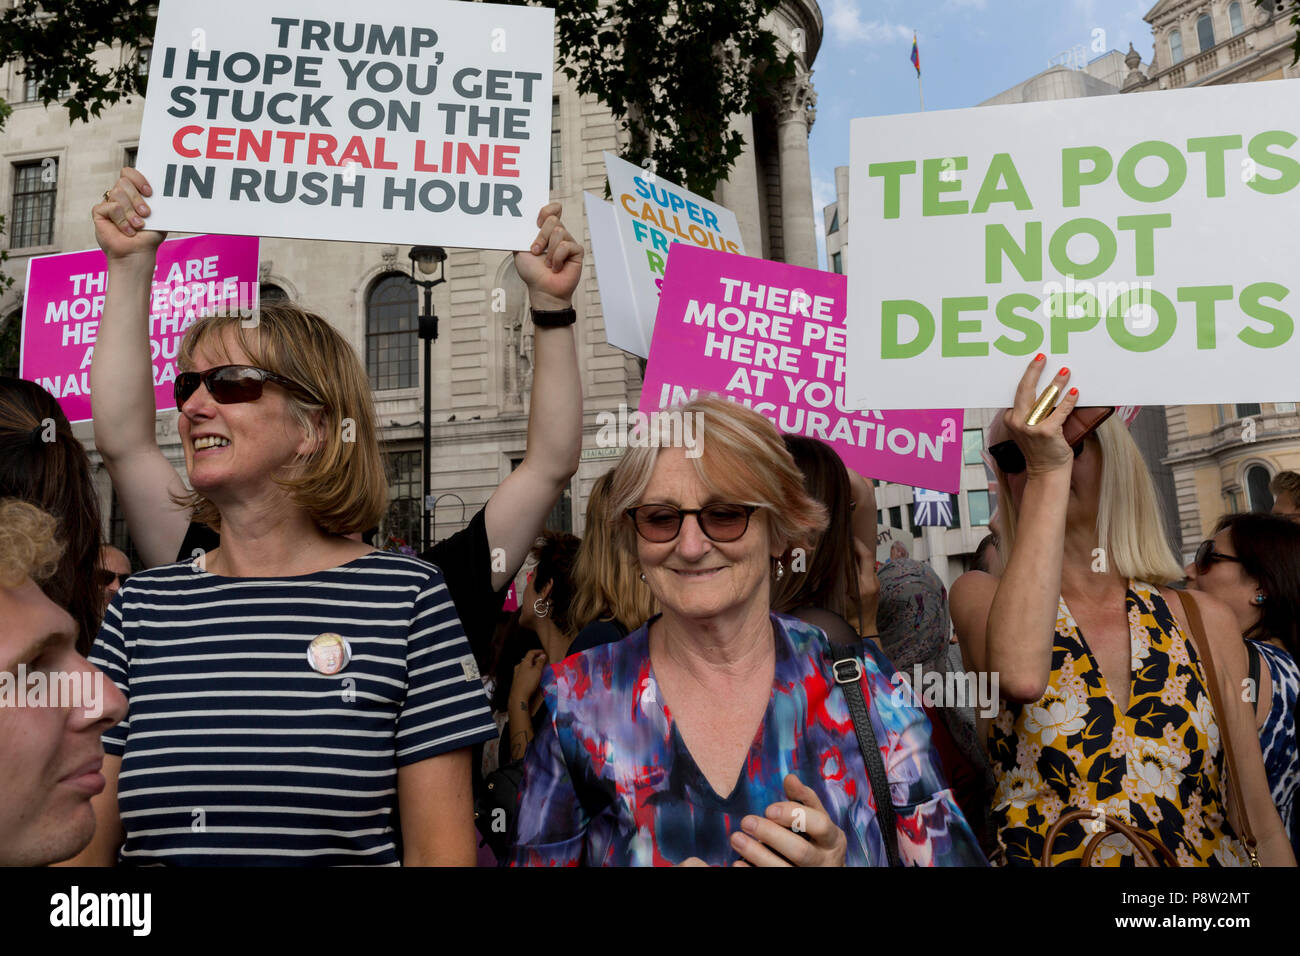 London, UK: Protesters against the visit of US President Donald Trump to the UK, gather in Trafalgar Square after marching through central London, on 13th July 2018, in London, England.  Photo by Richard Baker / Alamy Live News Stock Photo